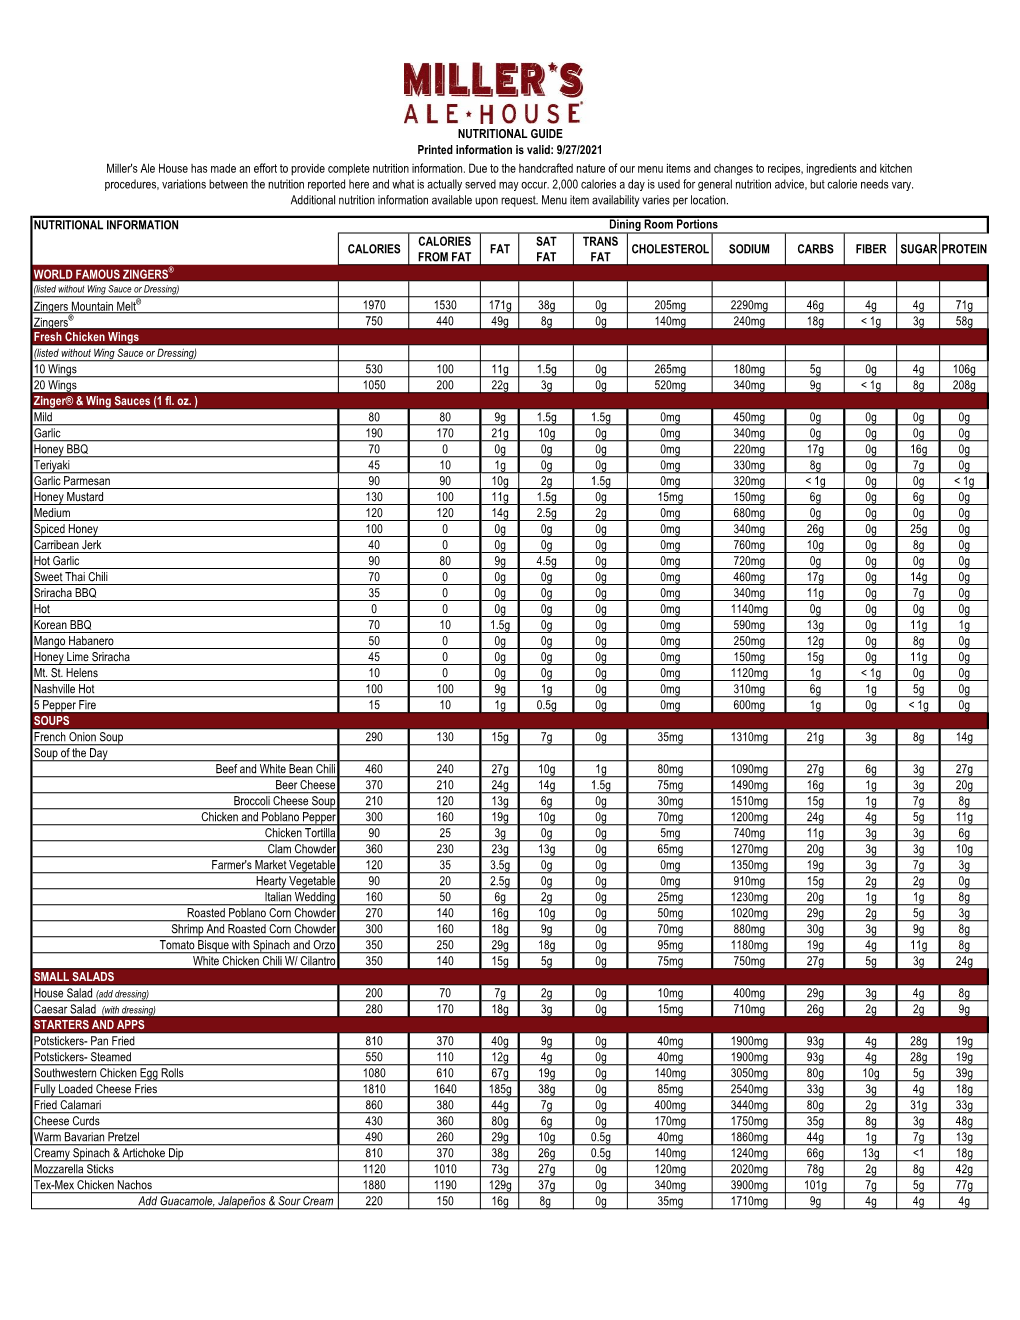 Nutritional Information Calories Calories from Fat